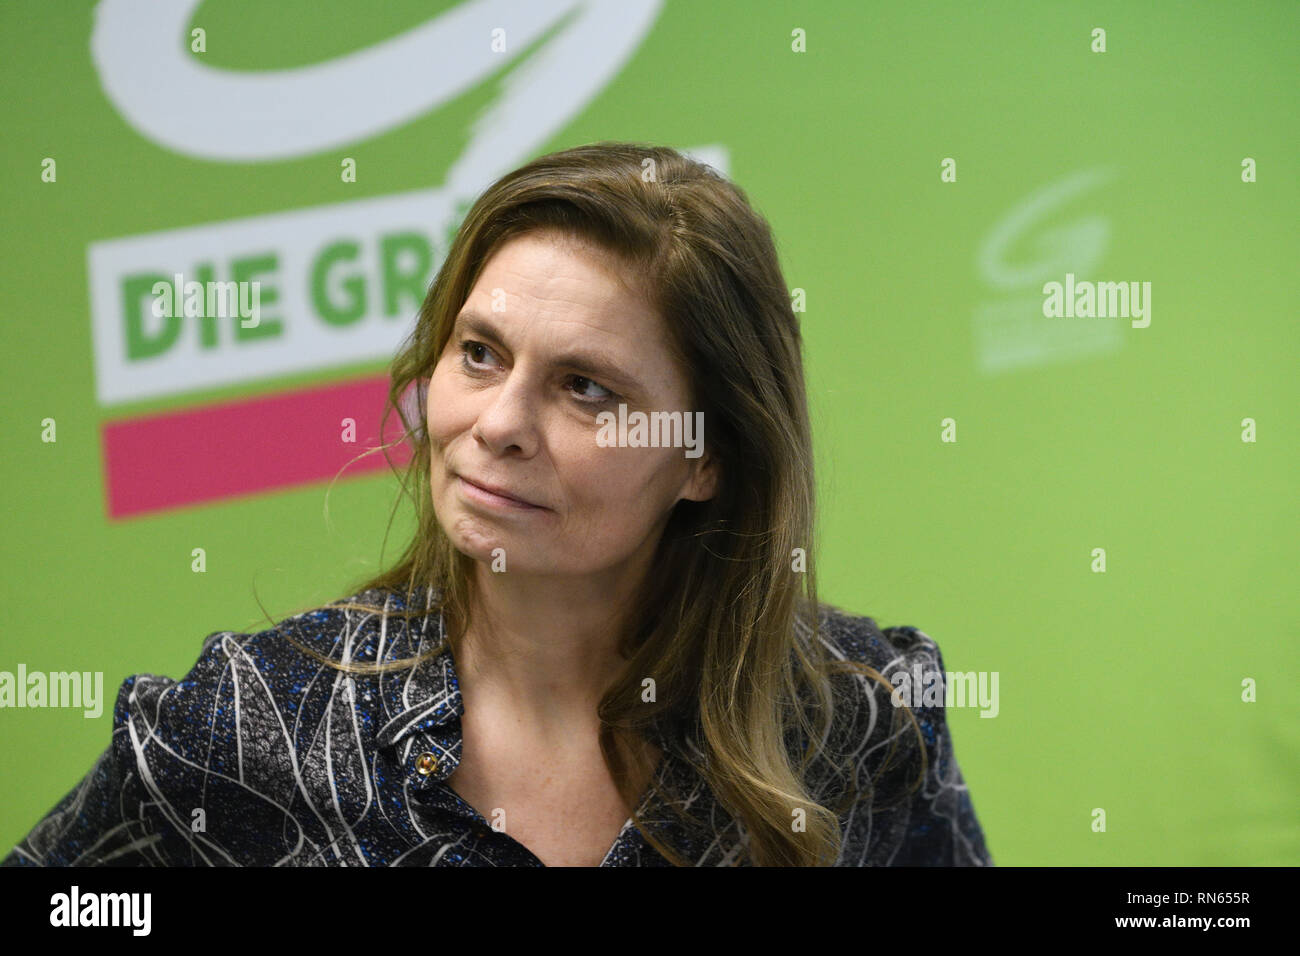 Vienna, Austria. 17 February 2019. Press Conference of the Green Party Austria. Picture shows Sarah Wiener. Credit: Franz Perc / Alamy Live News Stock Photo